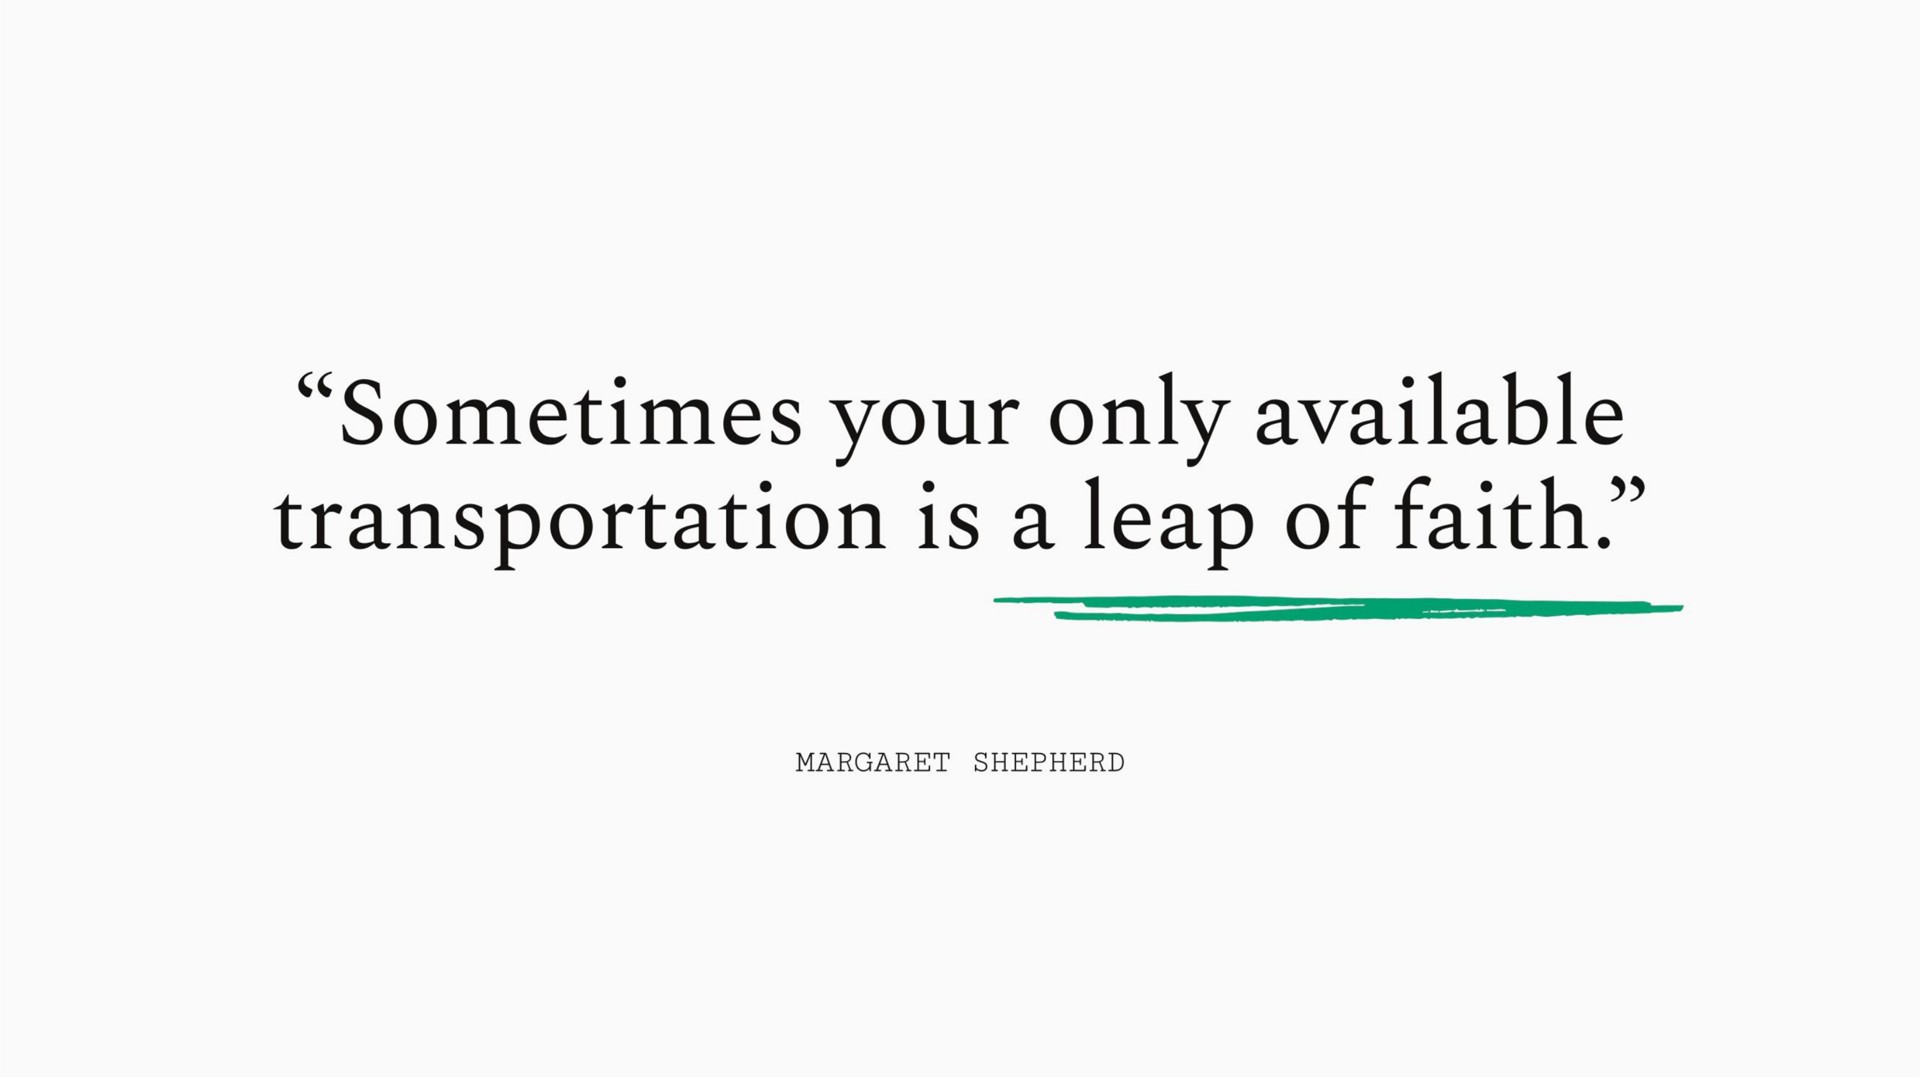 sometimes your only available transportation is a leap of faith | Sequoia Capital